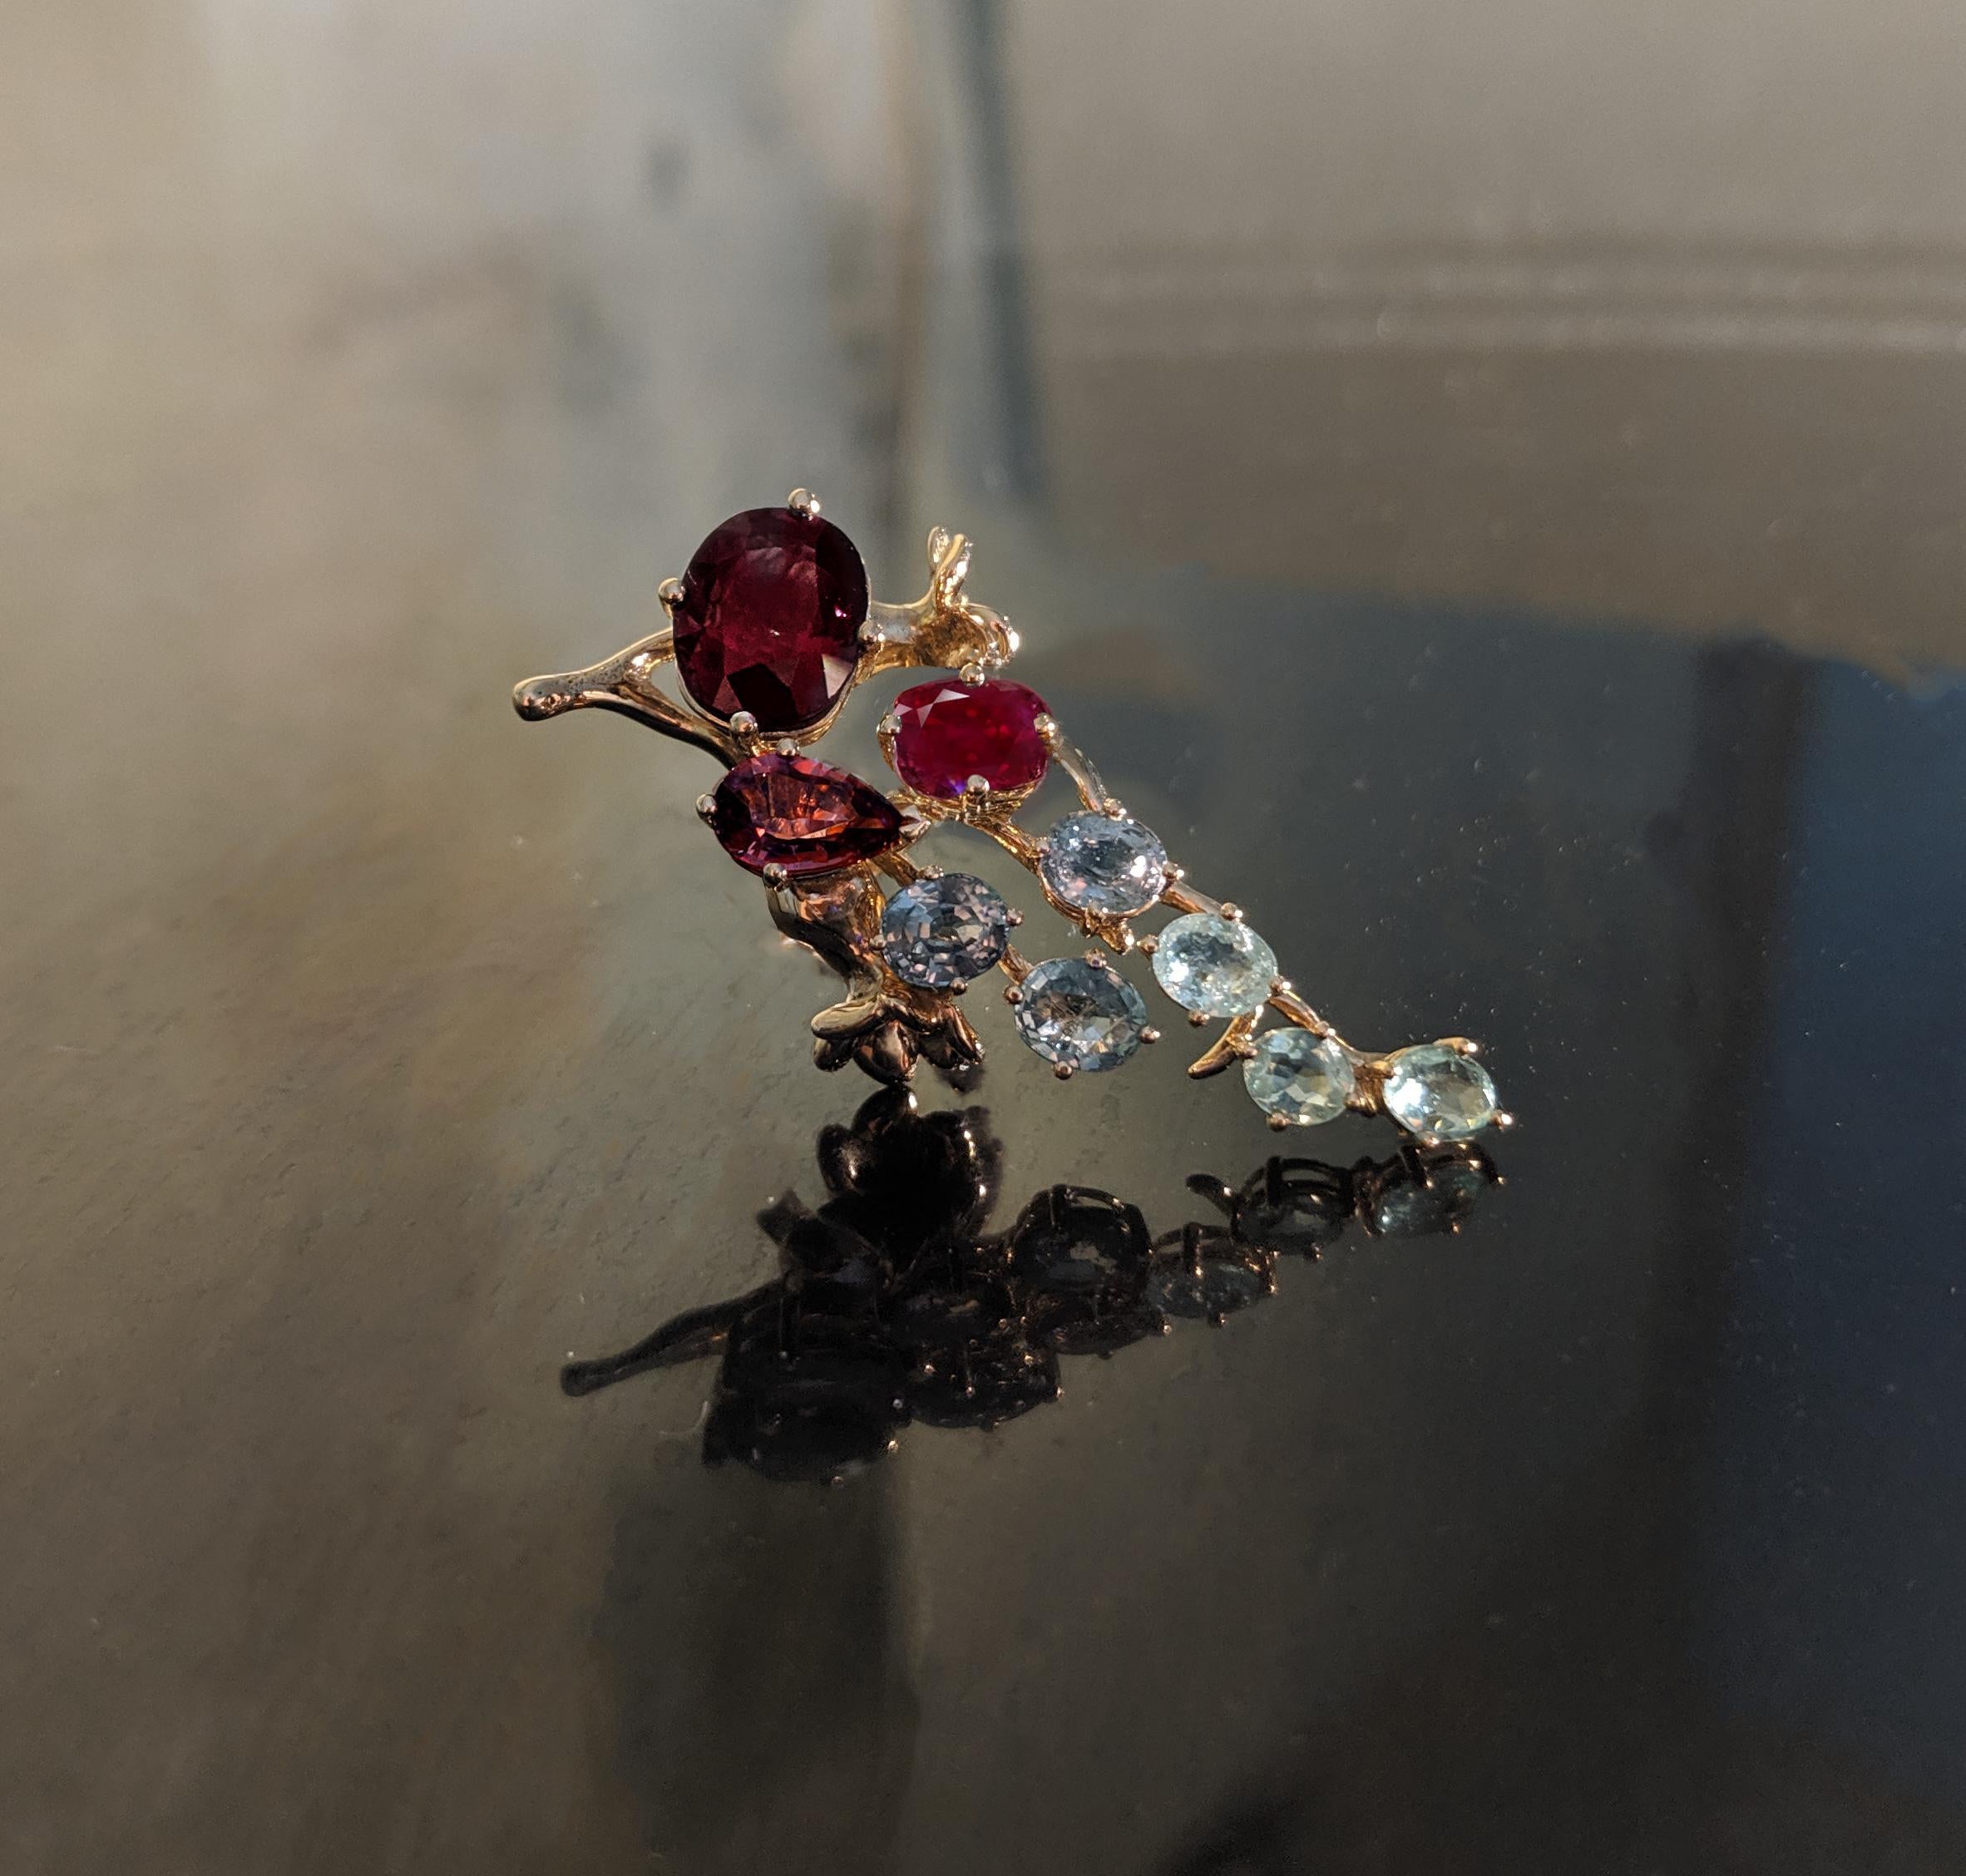 This Tobacco Flower contemporary brooch is made of 18 karat yellow gold.
The natural gems are:
Oval ruby 4,27 carats, dimension: 11,16x9,36 mm.
Oval cold red sapphire, 0,95 carats.
Oval ruby warmer tone, 1,01 carats, 6,5x6 mm.
Pear cut cold malaya